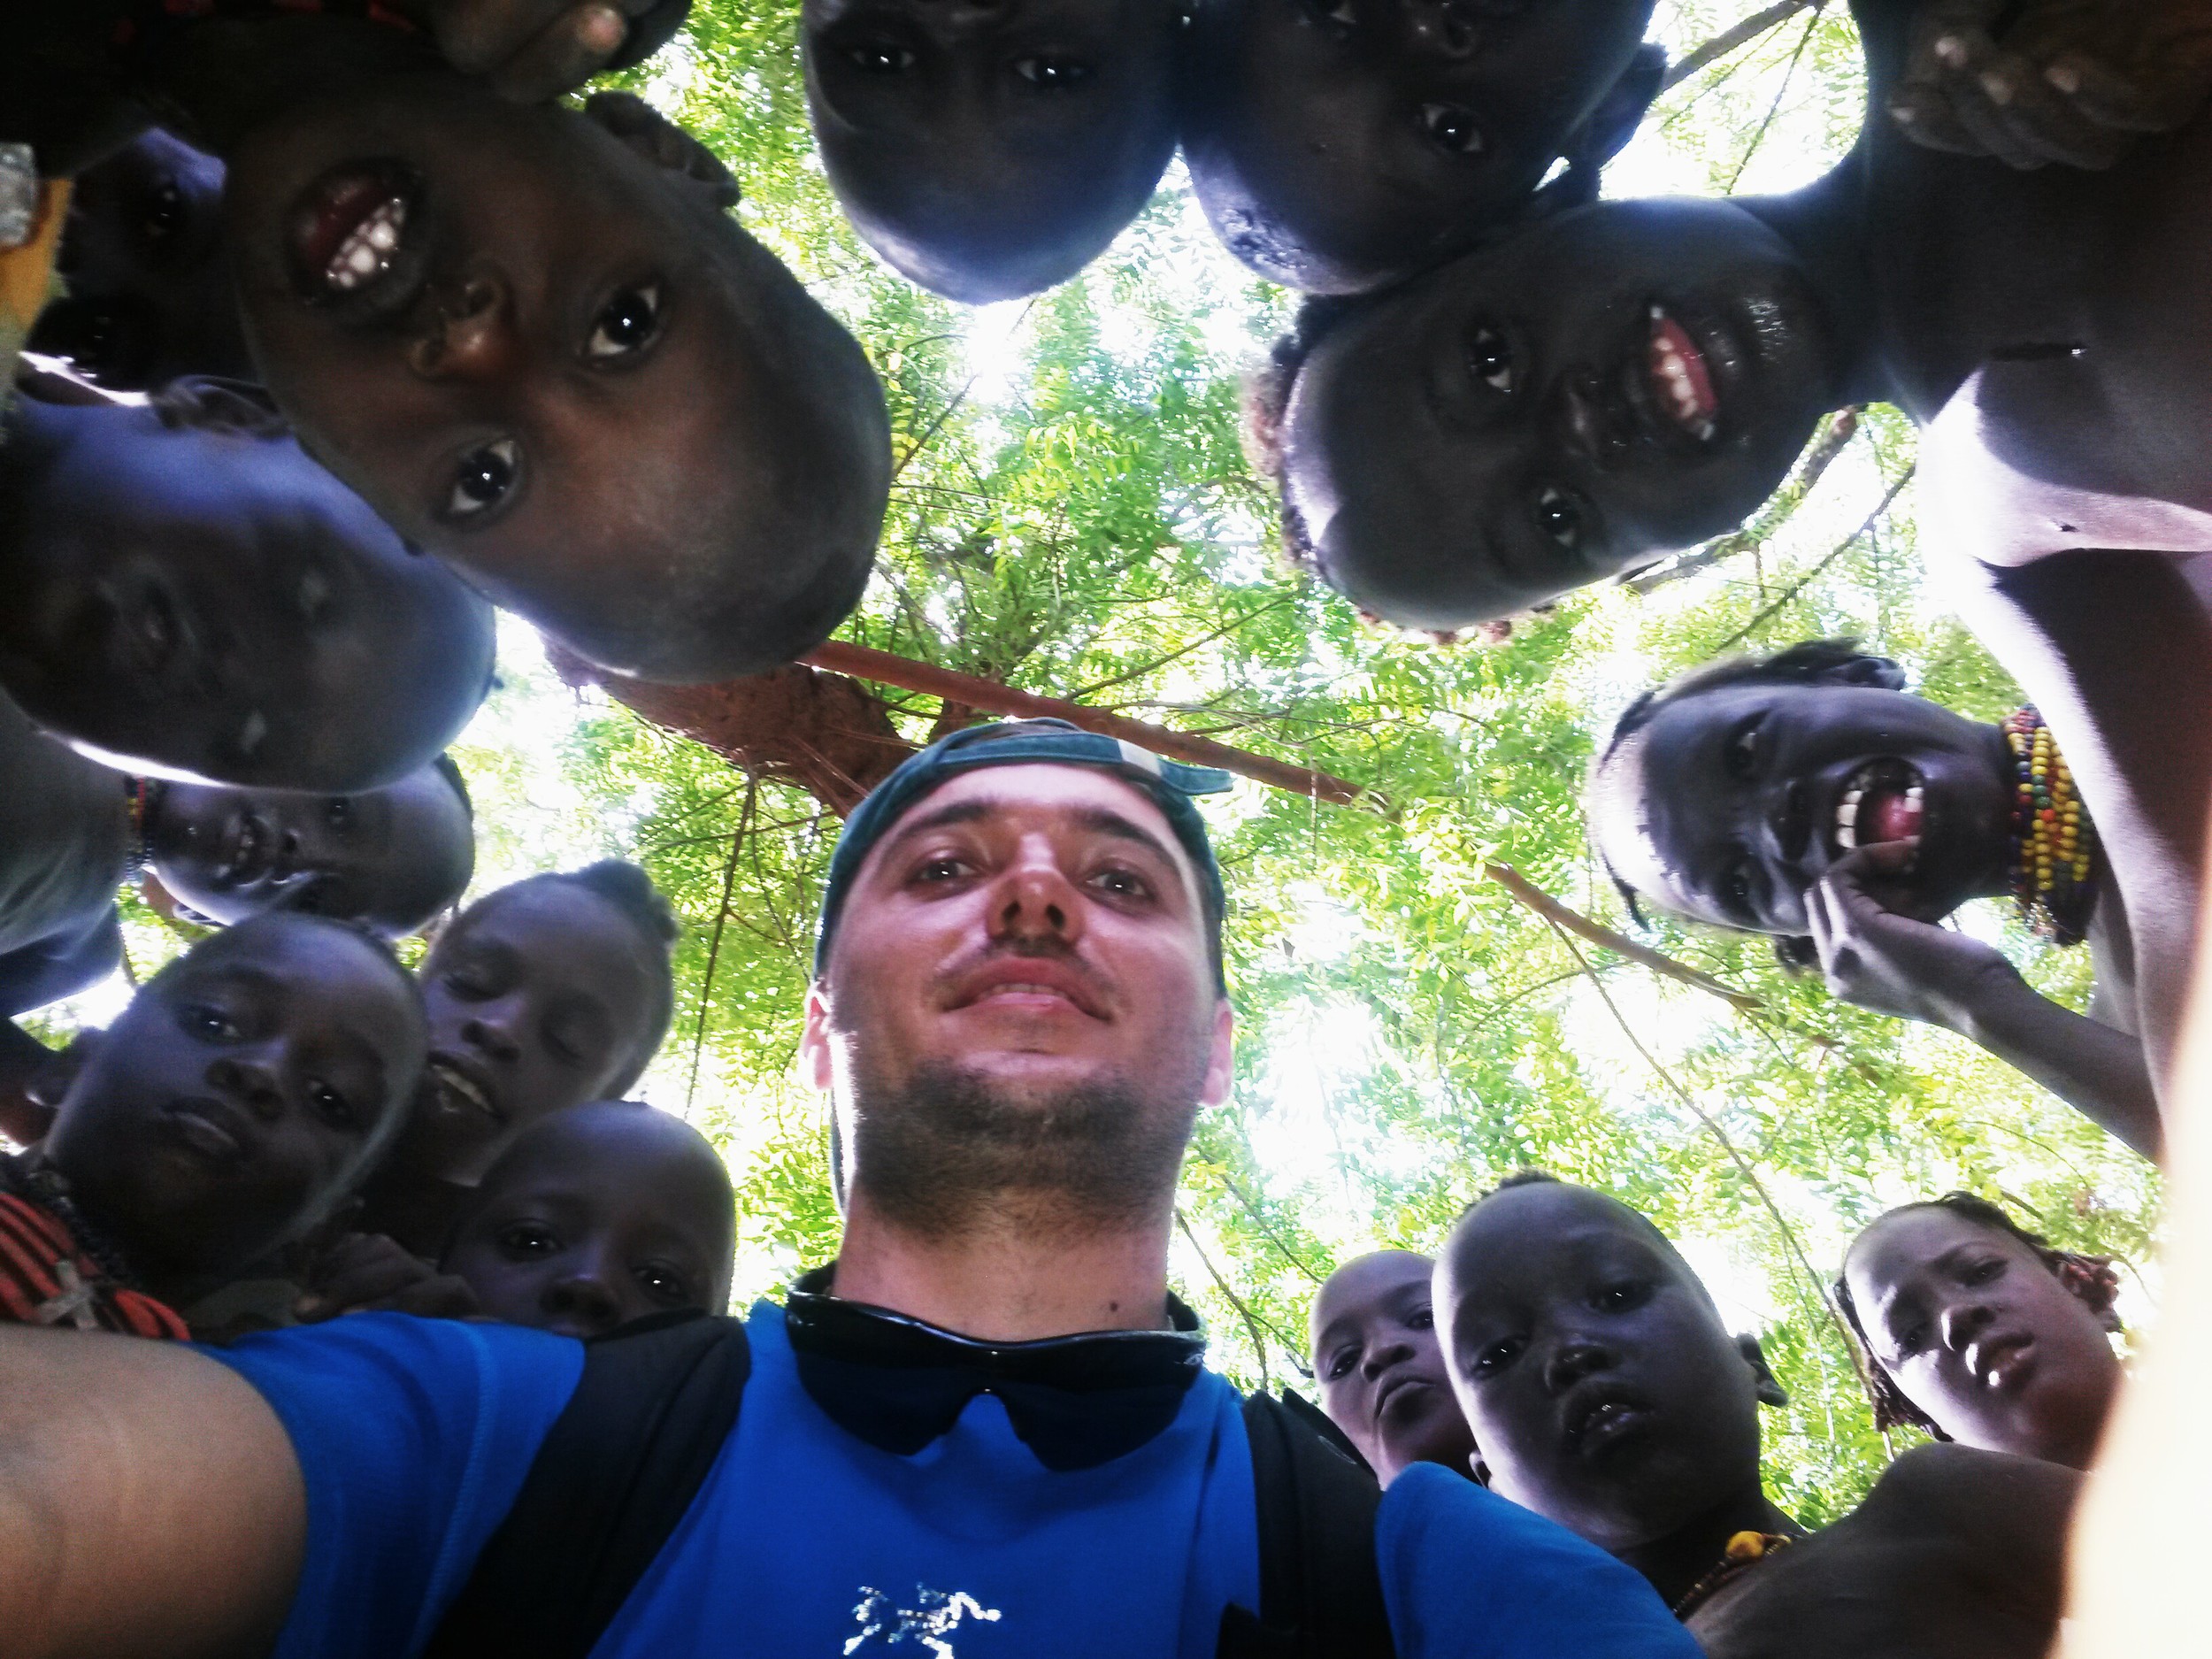 Georgi surrounded by the kids of Daasanach tribe, Lower Omo Valley, Ethiopia